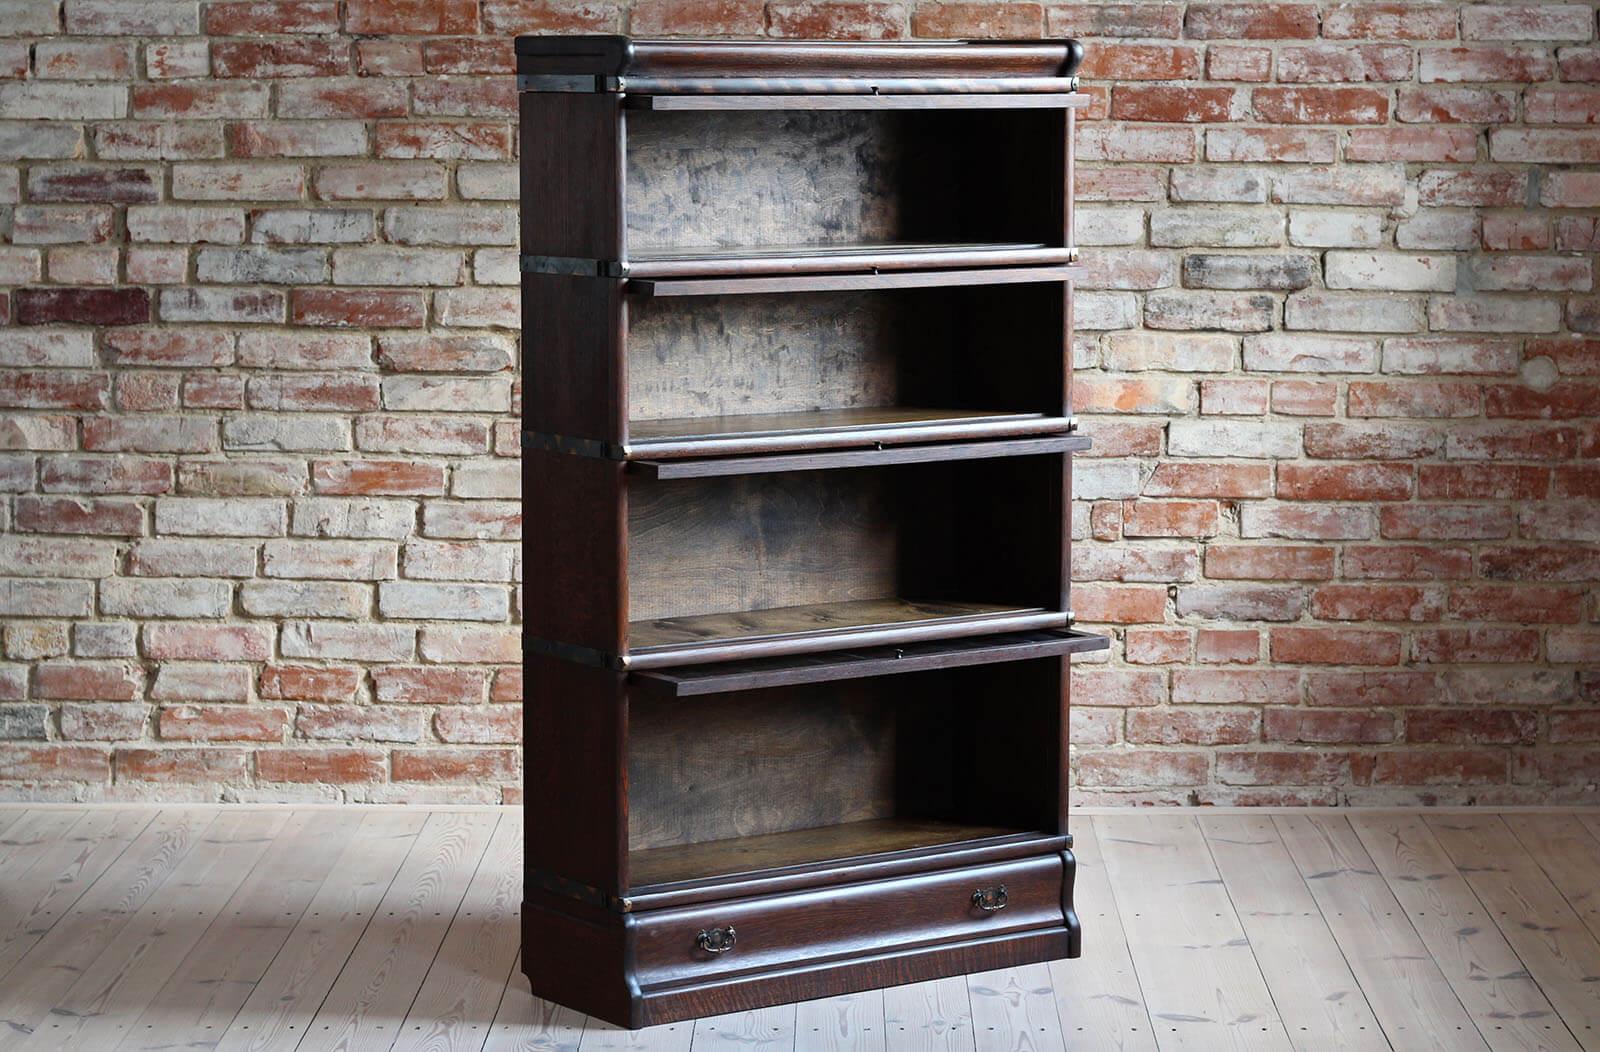 Rare barrister bookcase with beautiful and unique lead glass. The piece features 4 stacking bookcases of different sizes that allow to store books or items of different heights. It is made of solid oak wood around early 20th century. In the lower